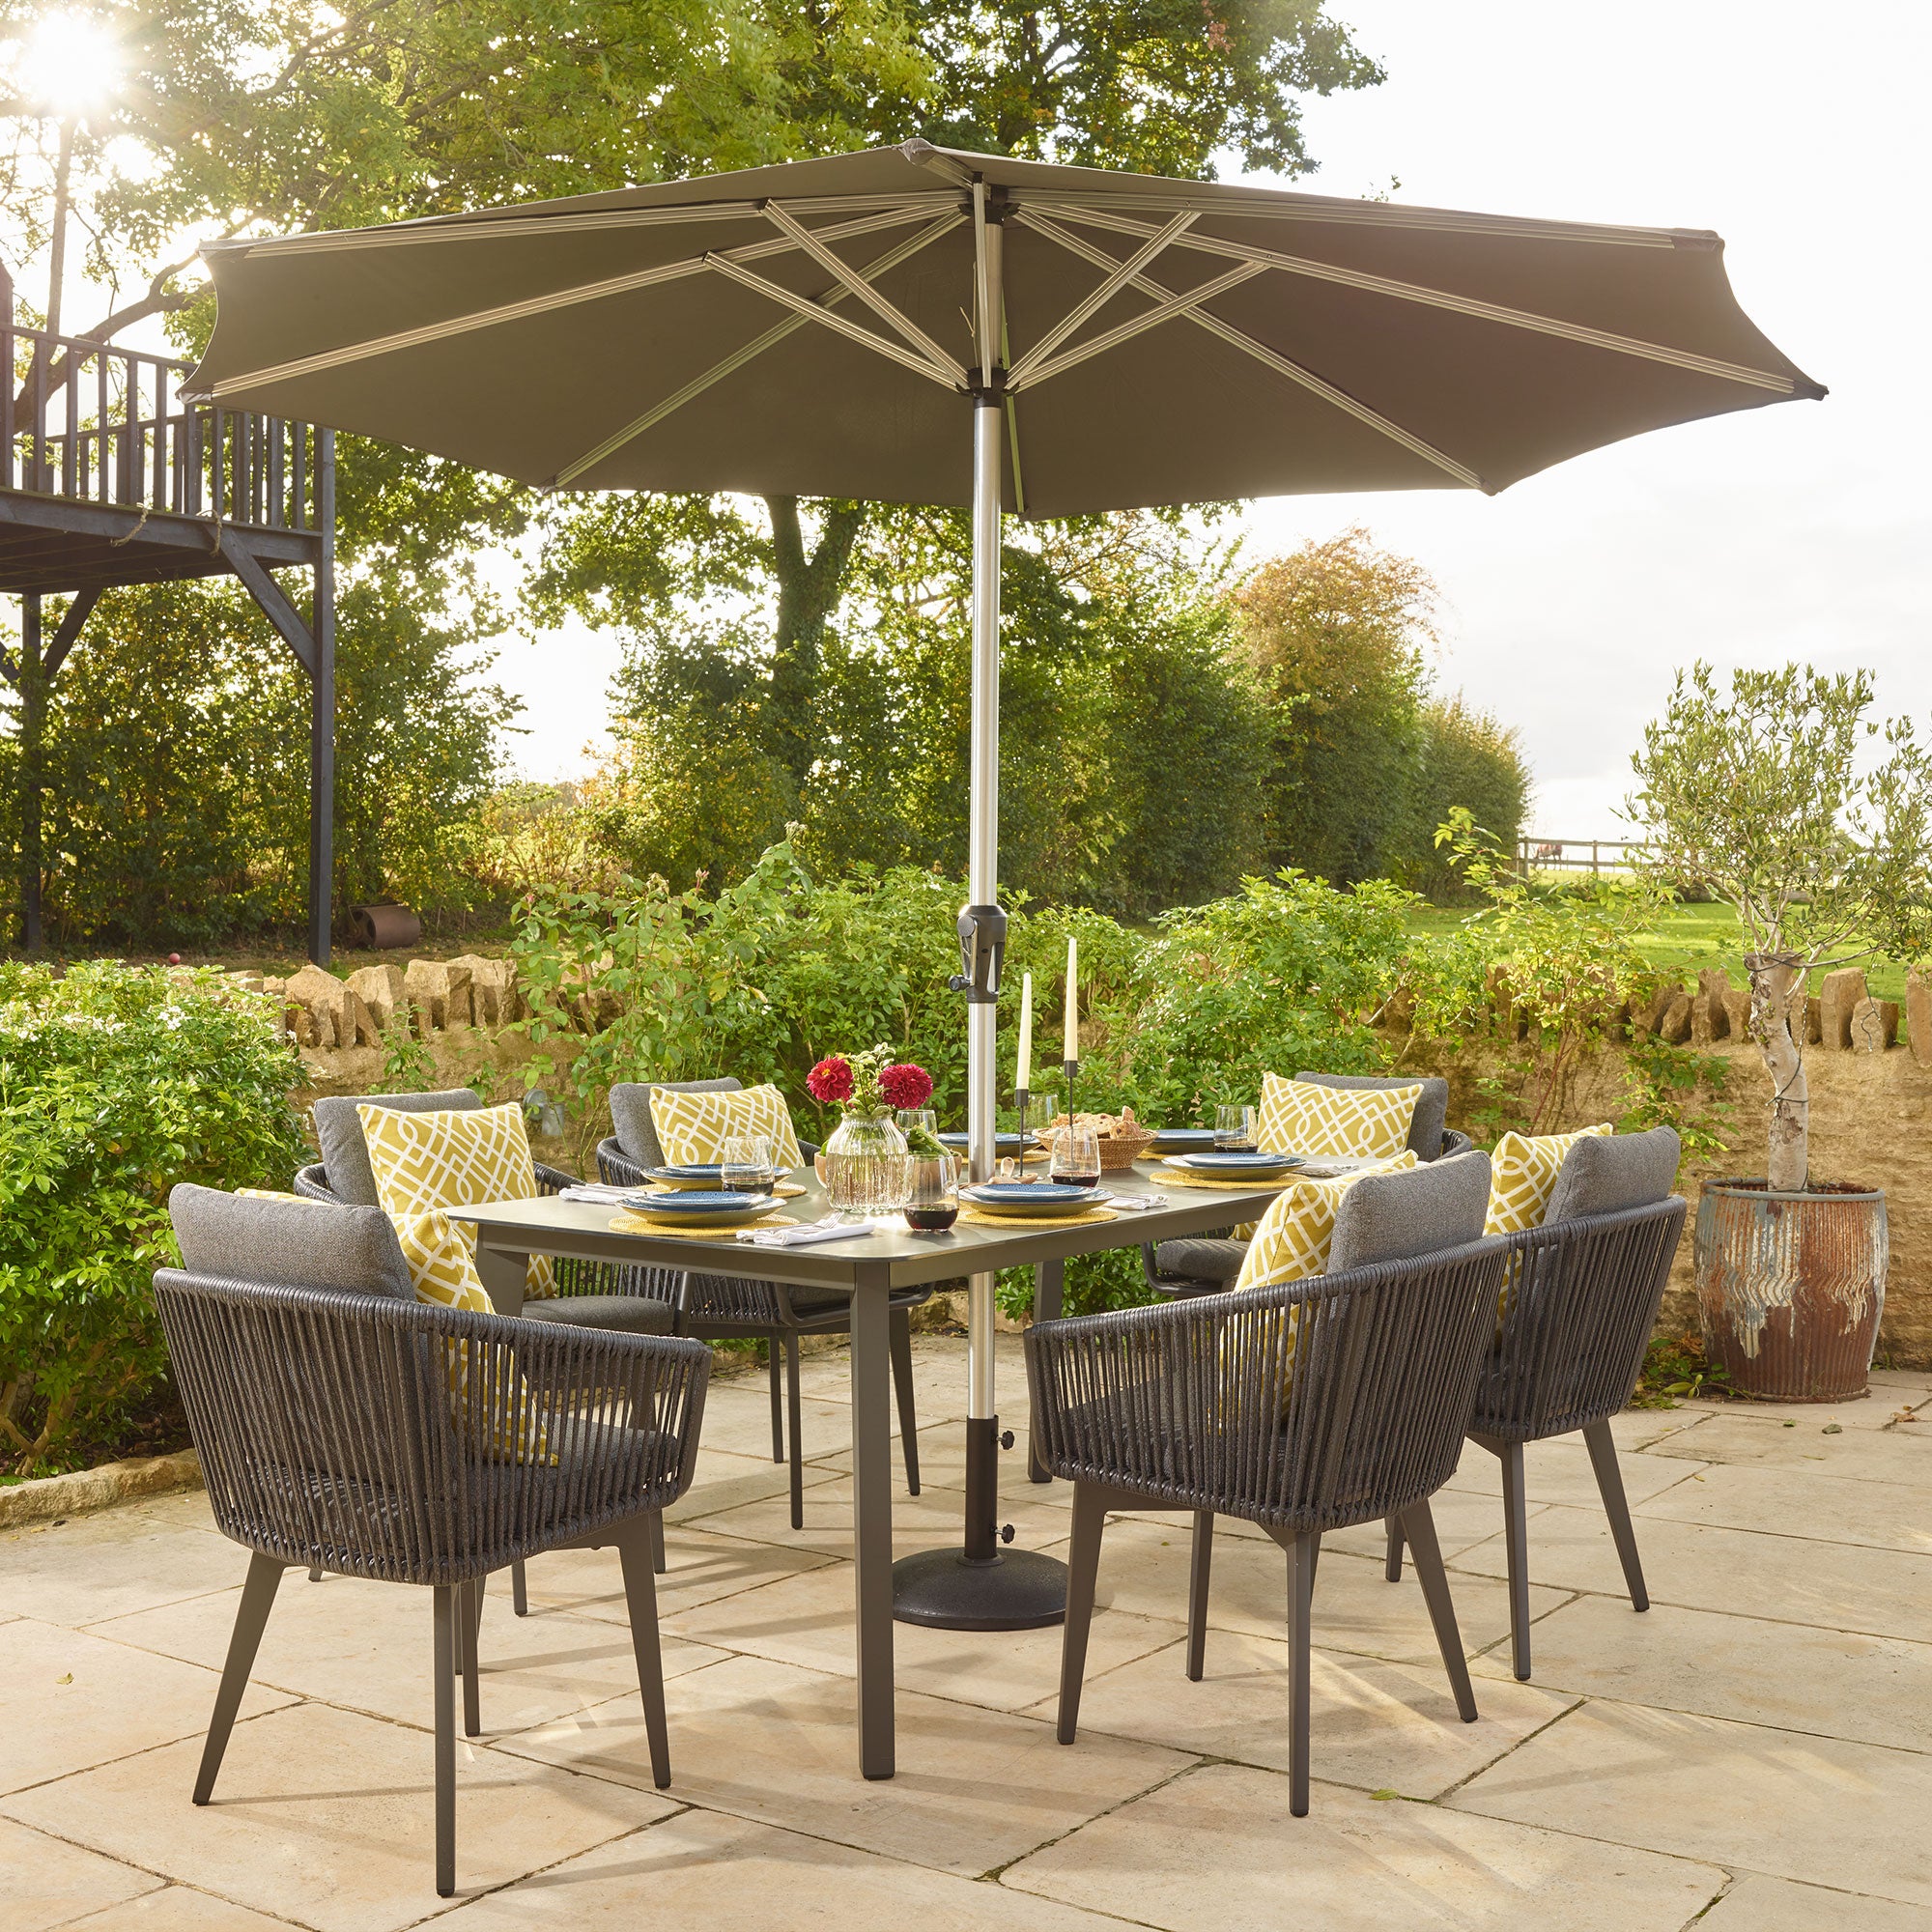 Rectangular 183 x 96cm Dining Table And 6 Chairs In Rope Effect Anthracite Including Parasol & Base